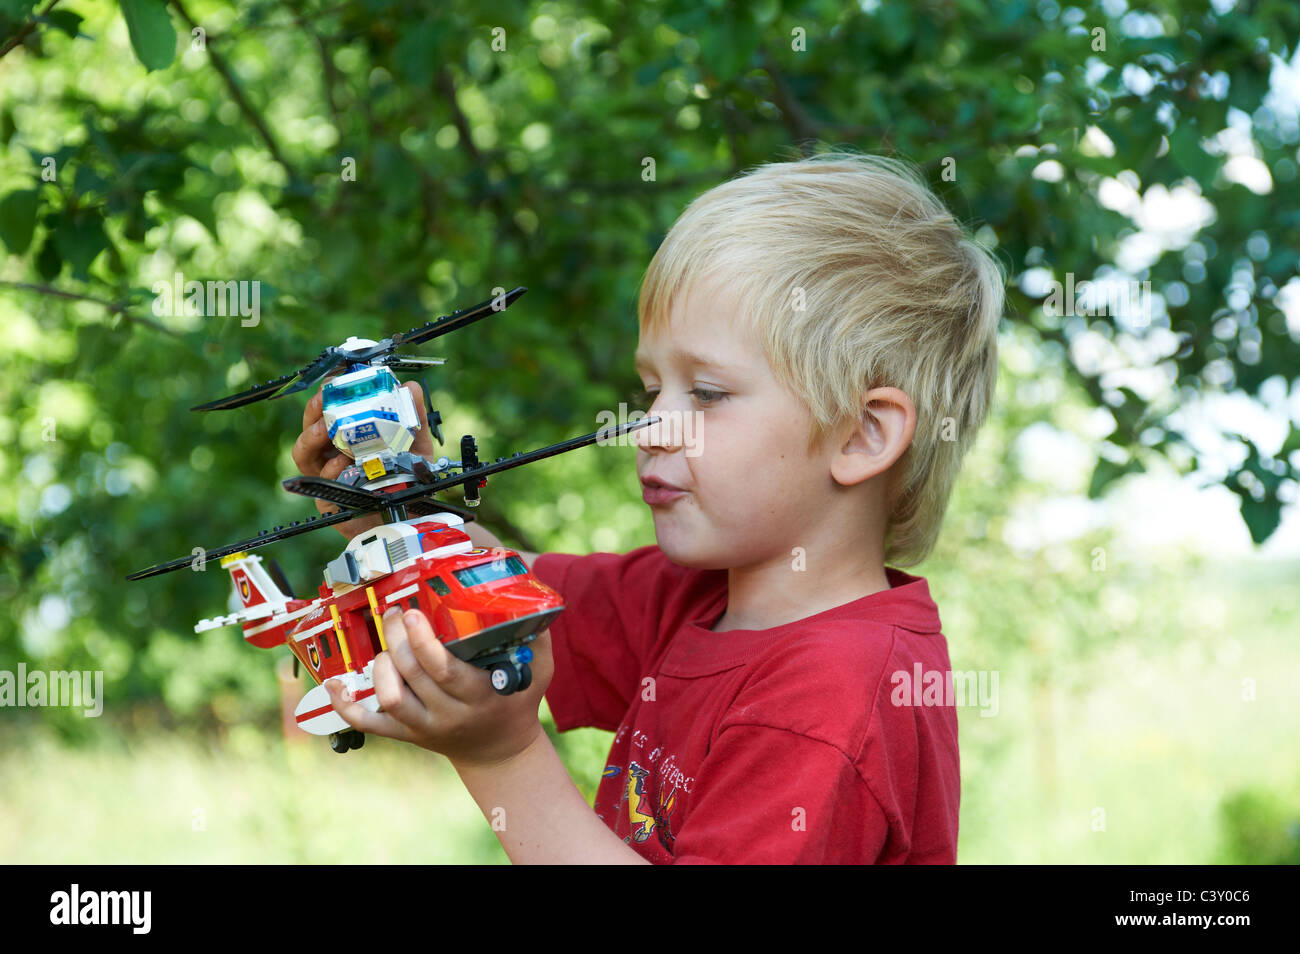 A Child Young Blond Boy Playing with a Toy Lego Firefighter Rescue Helicopter and Police Helicopter outdoors Stock Photo